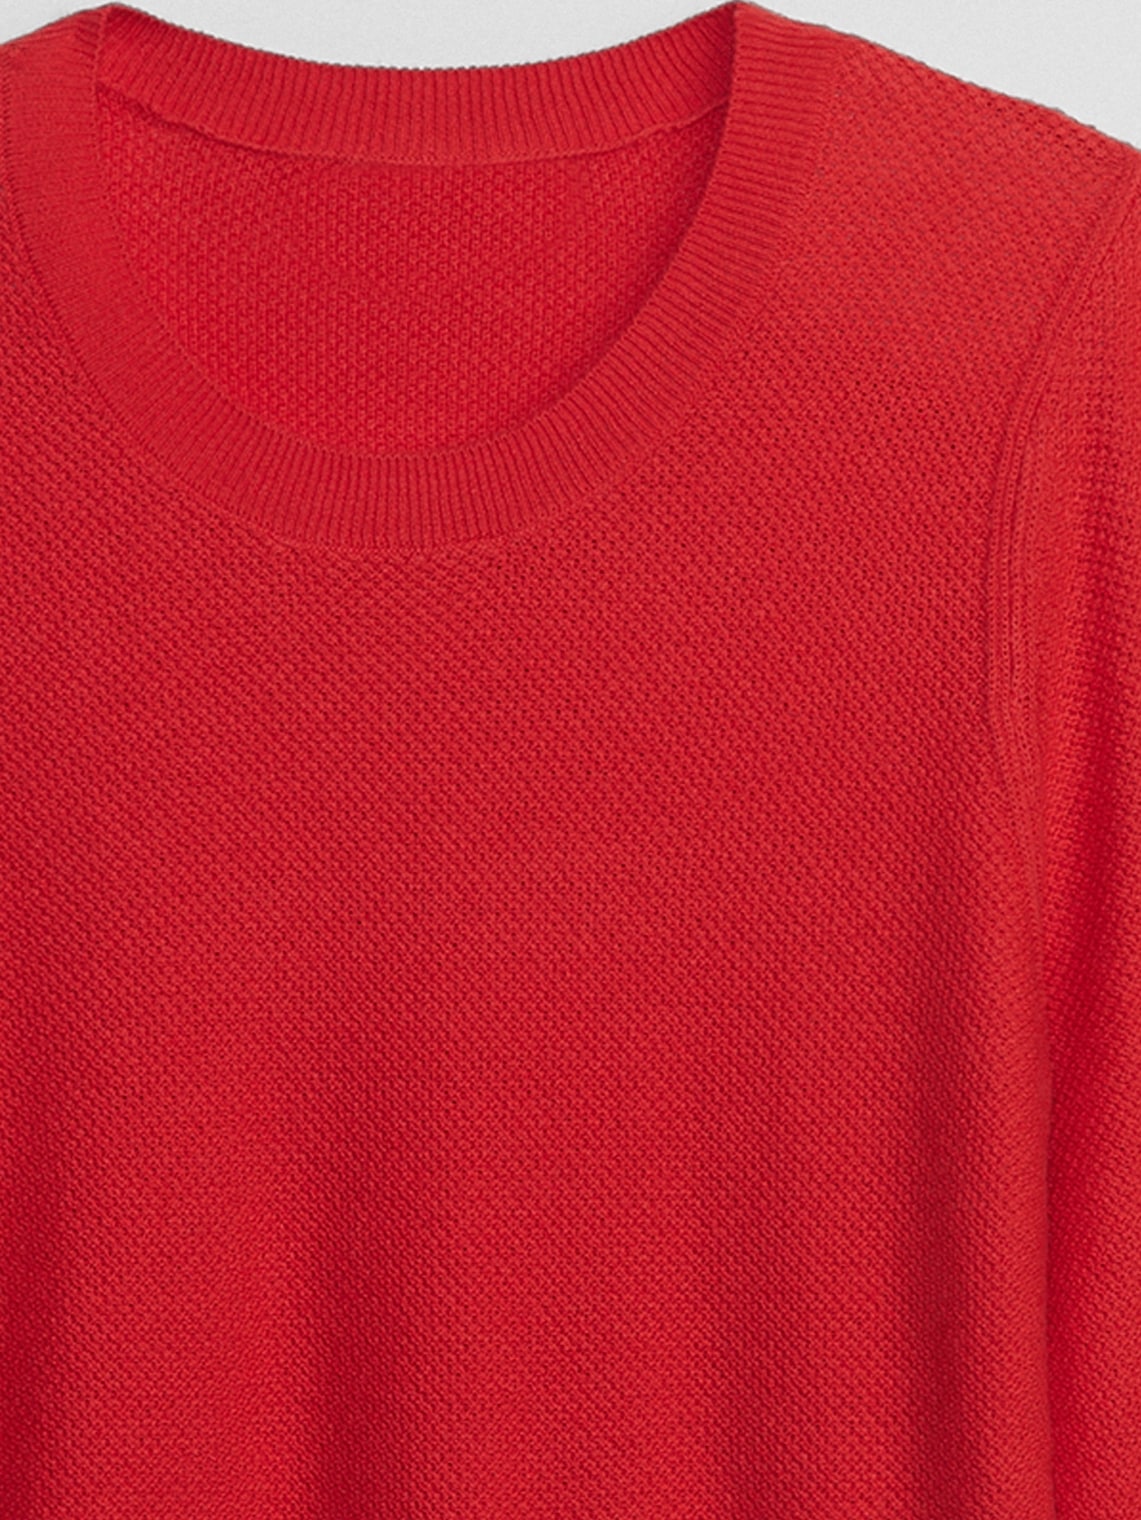 Relaxed Crewneck Sweater | Gap Factory